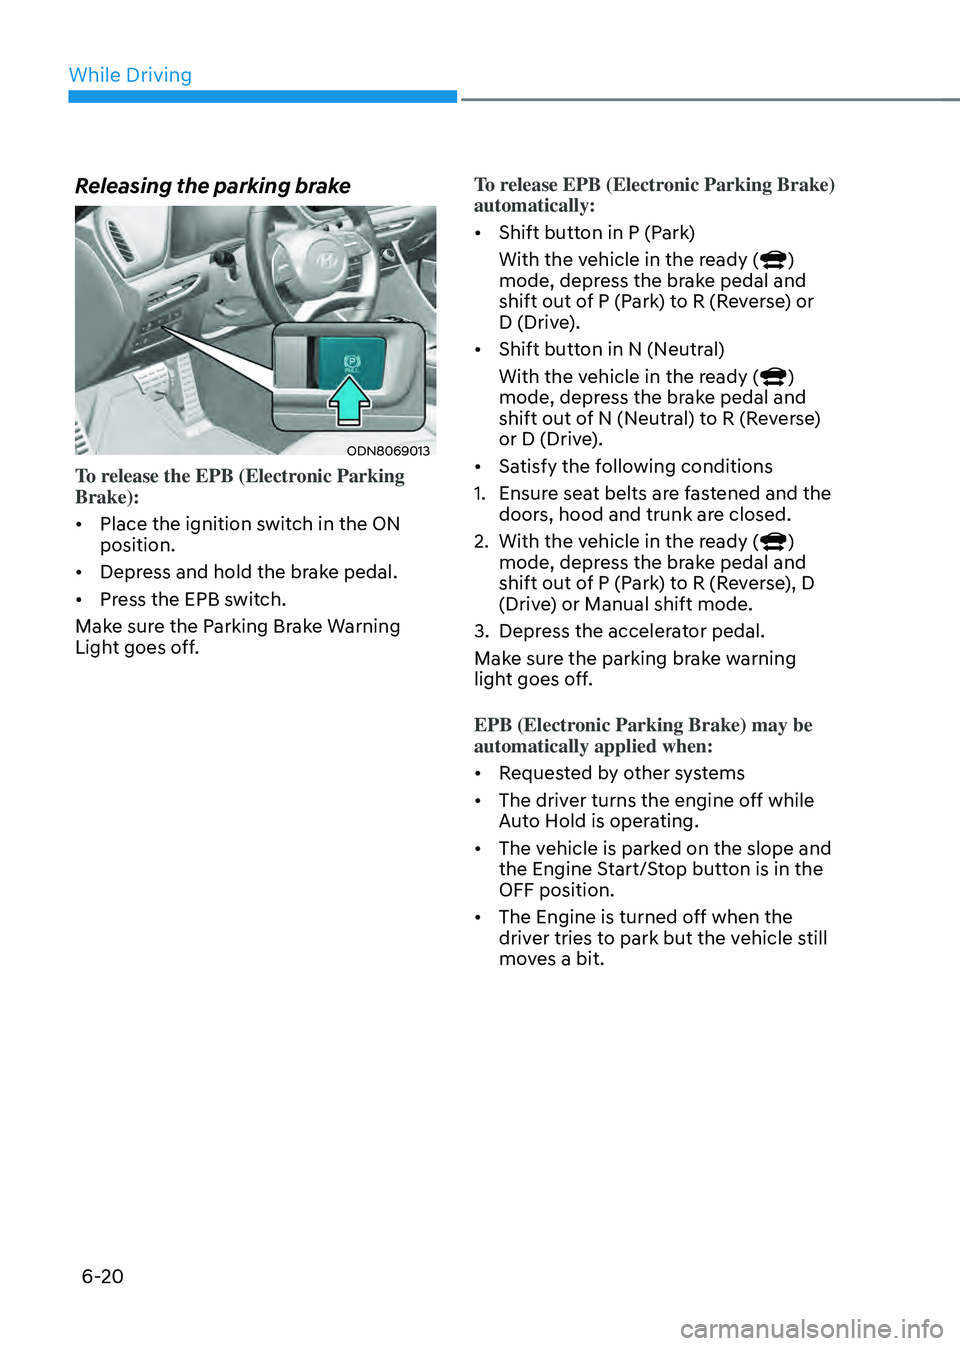 HYUNDAI SONATA HYBRID 2022  Owners Manual While Driving
6-20
Releasing the parking brake
ODN8069013
To release the EPB (Electronic Parking 
Brake):
•	Place the ignition switch in the ON 
position.
•	 Depress and hold the brake pedal.
•	